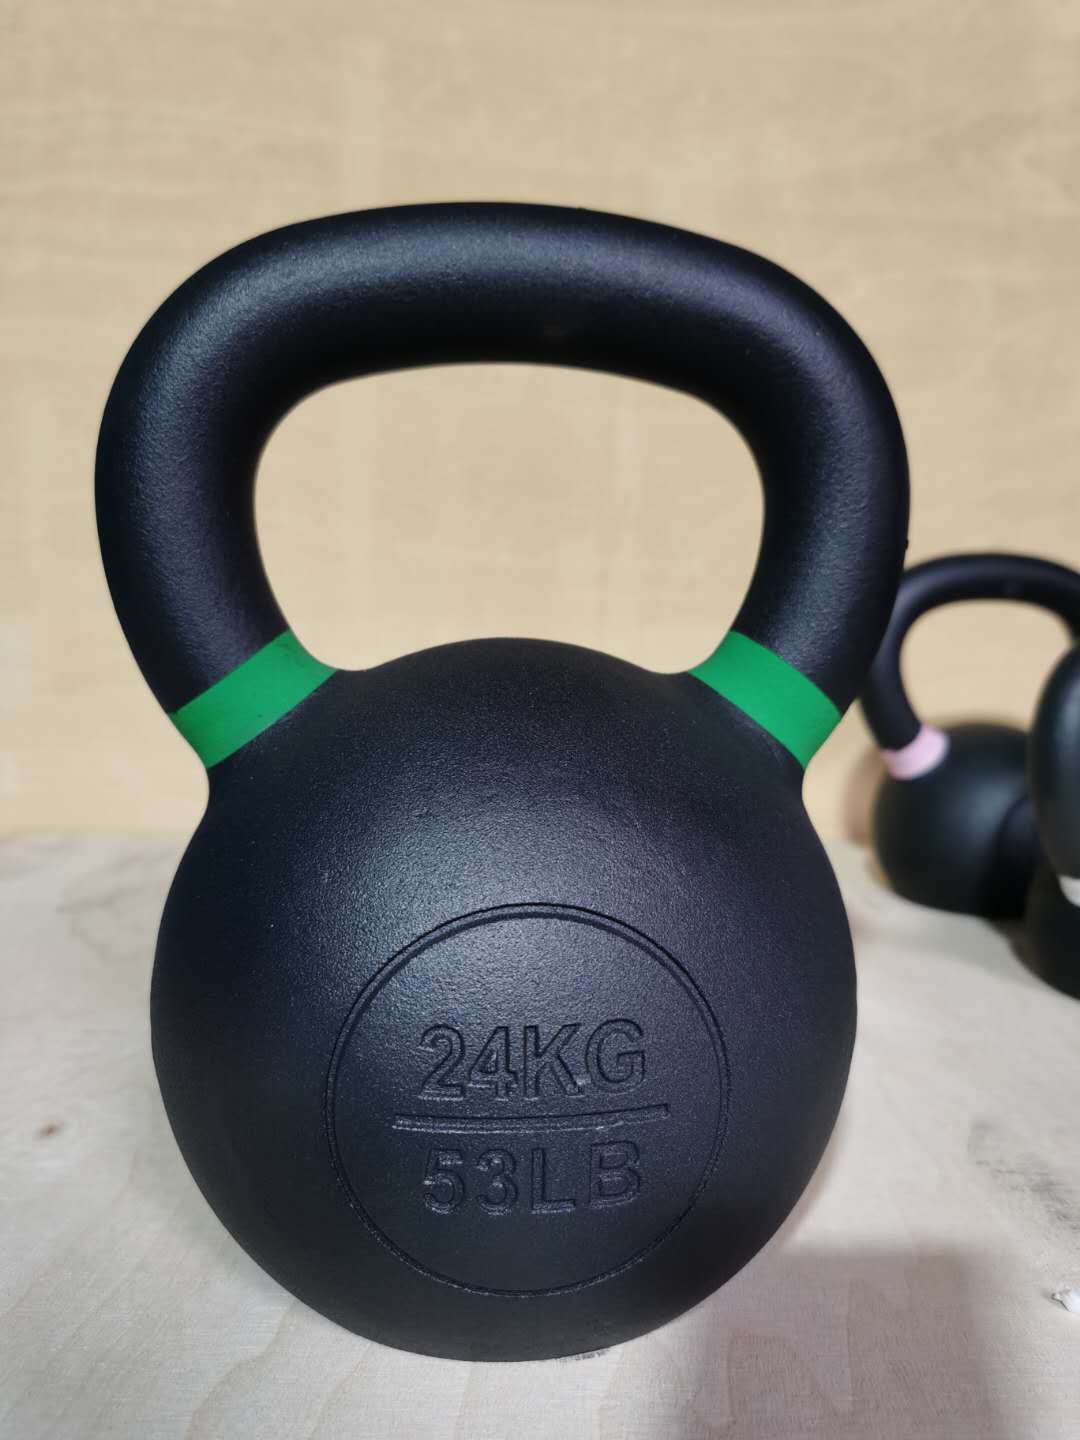 OEM LB KG color powder coated kettlebell  cast iron kettlebell set gym fit China kettlebell goldroad